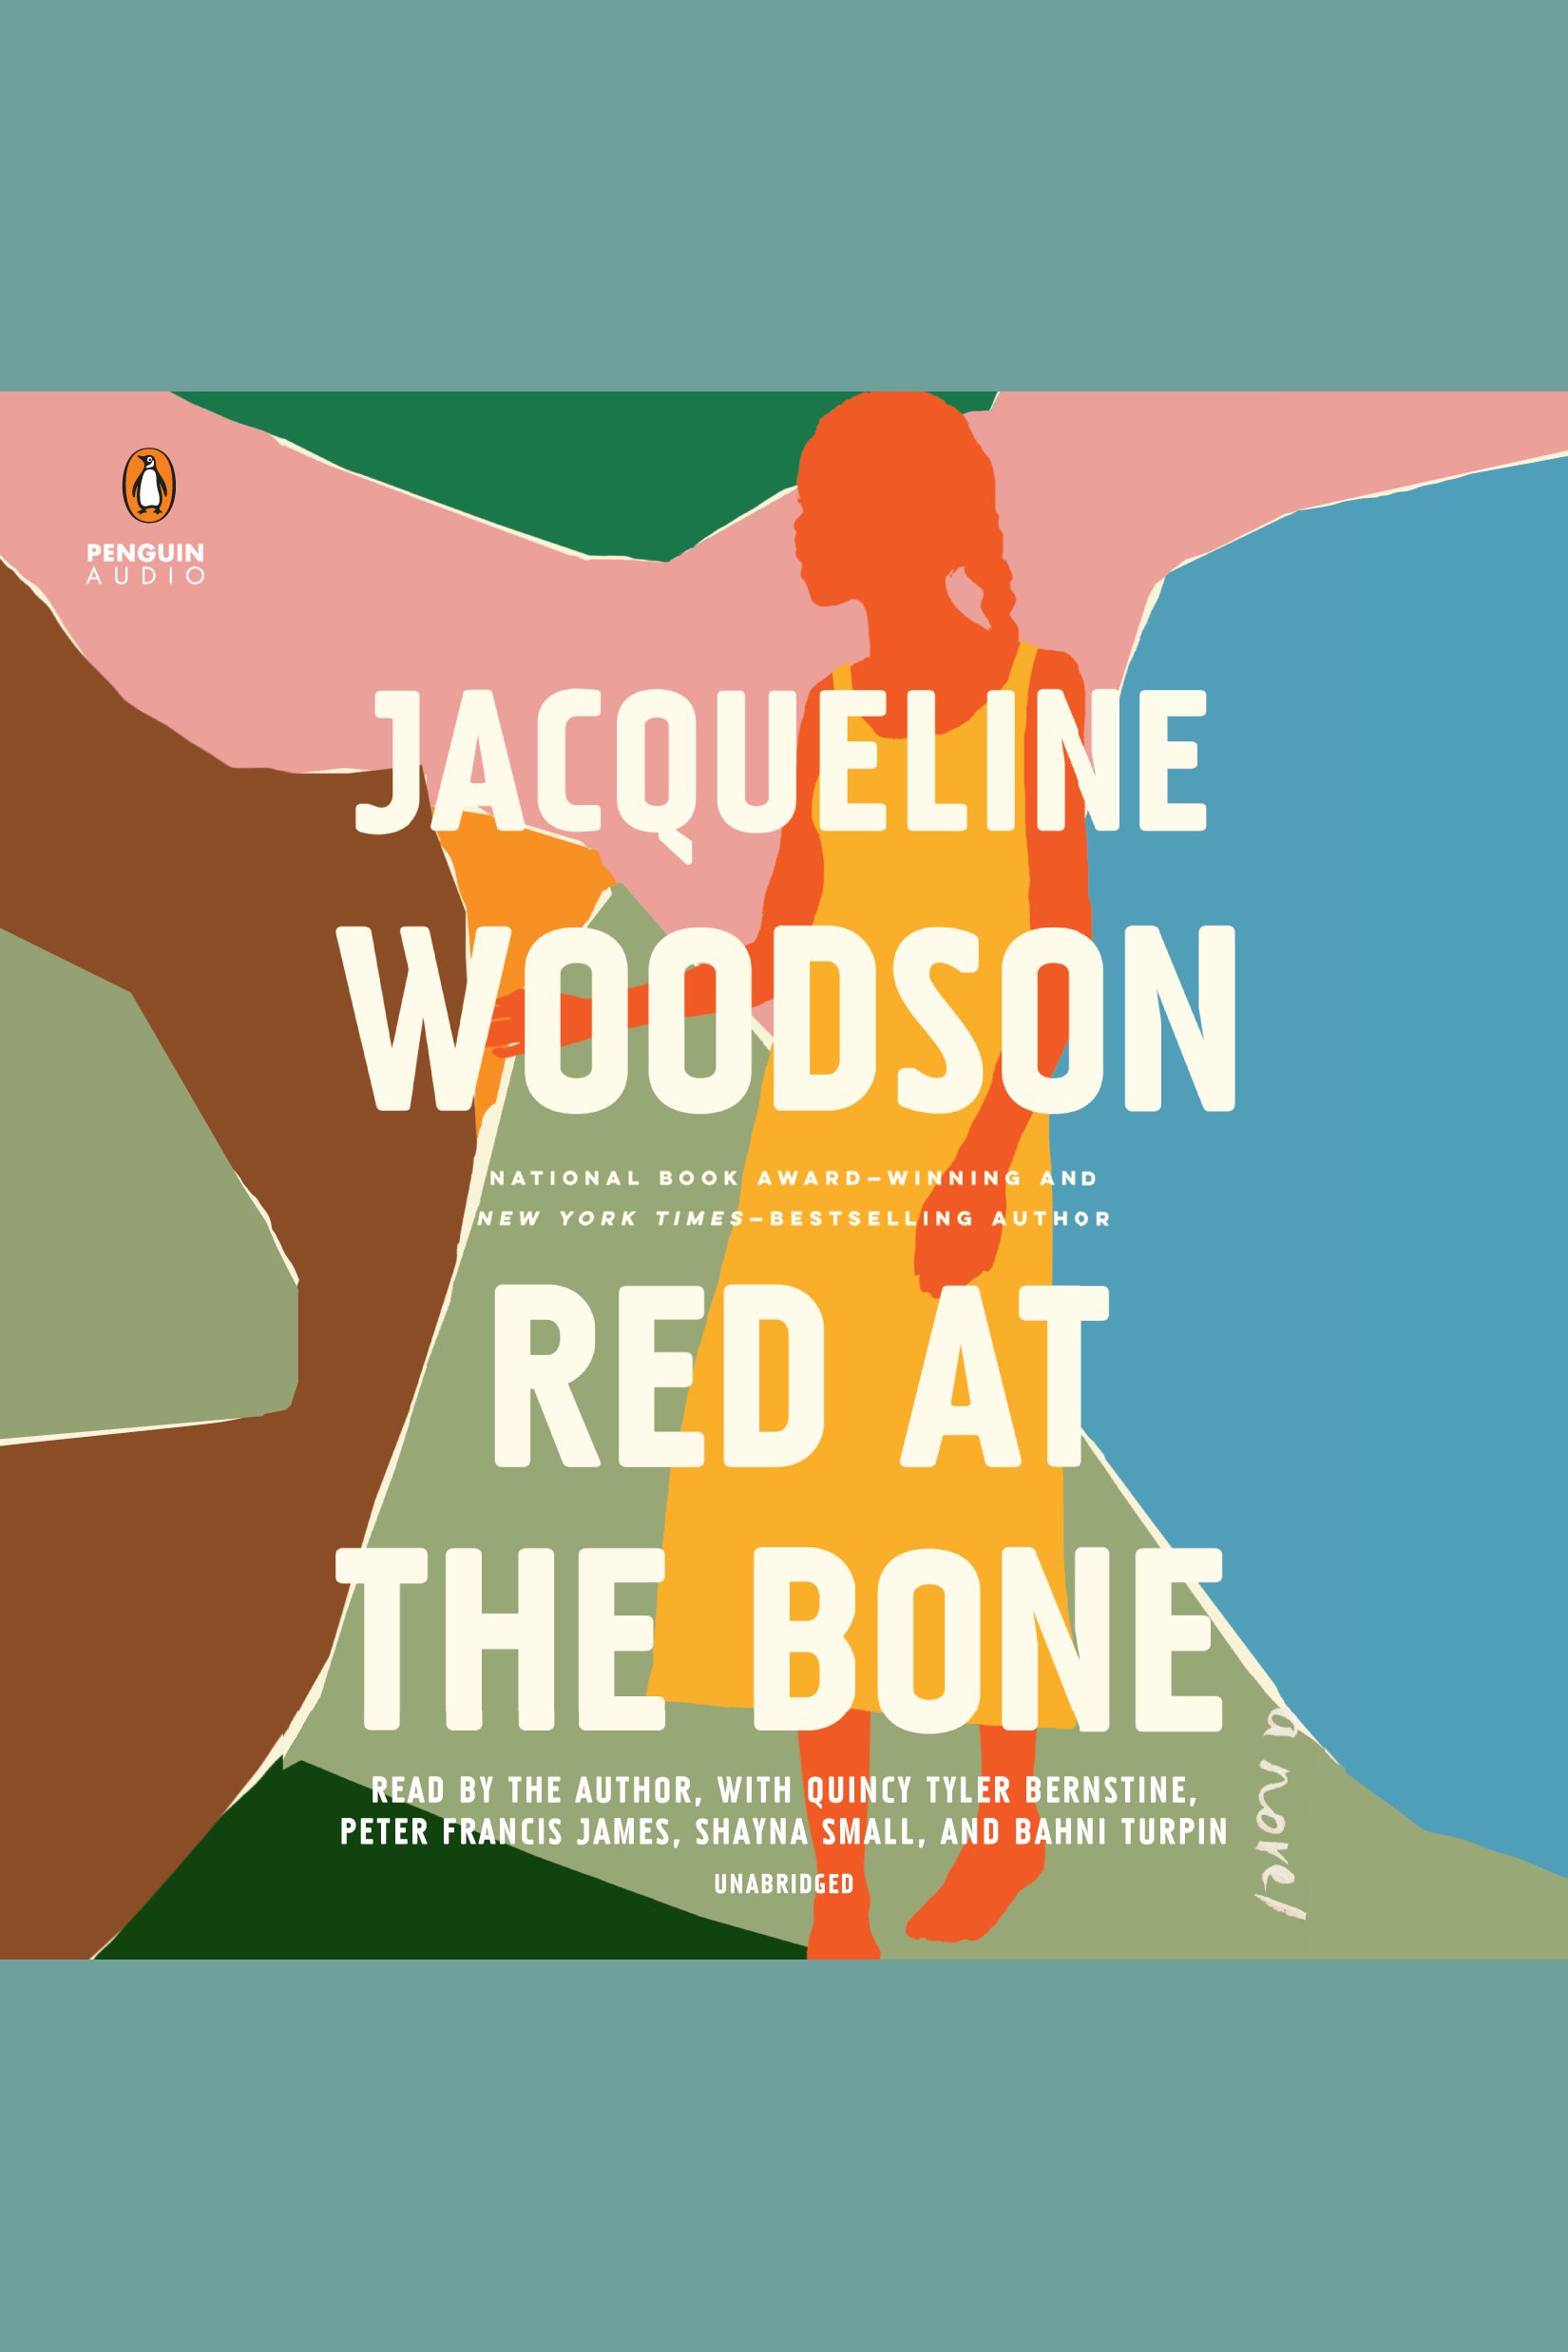 Red at the bone cover image